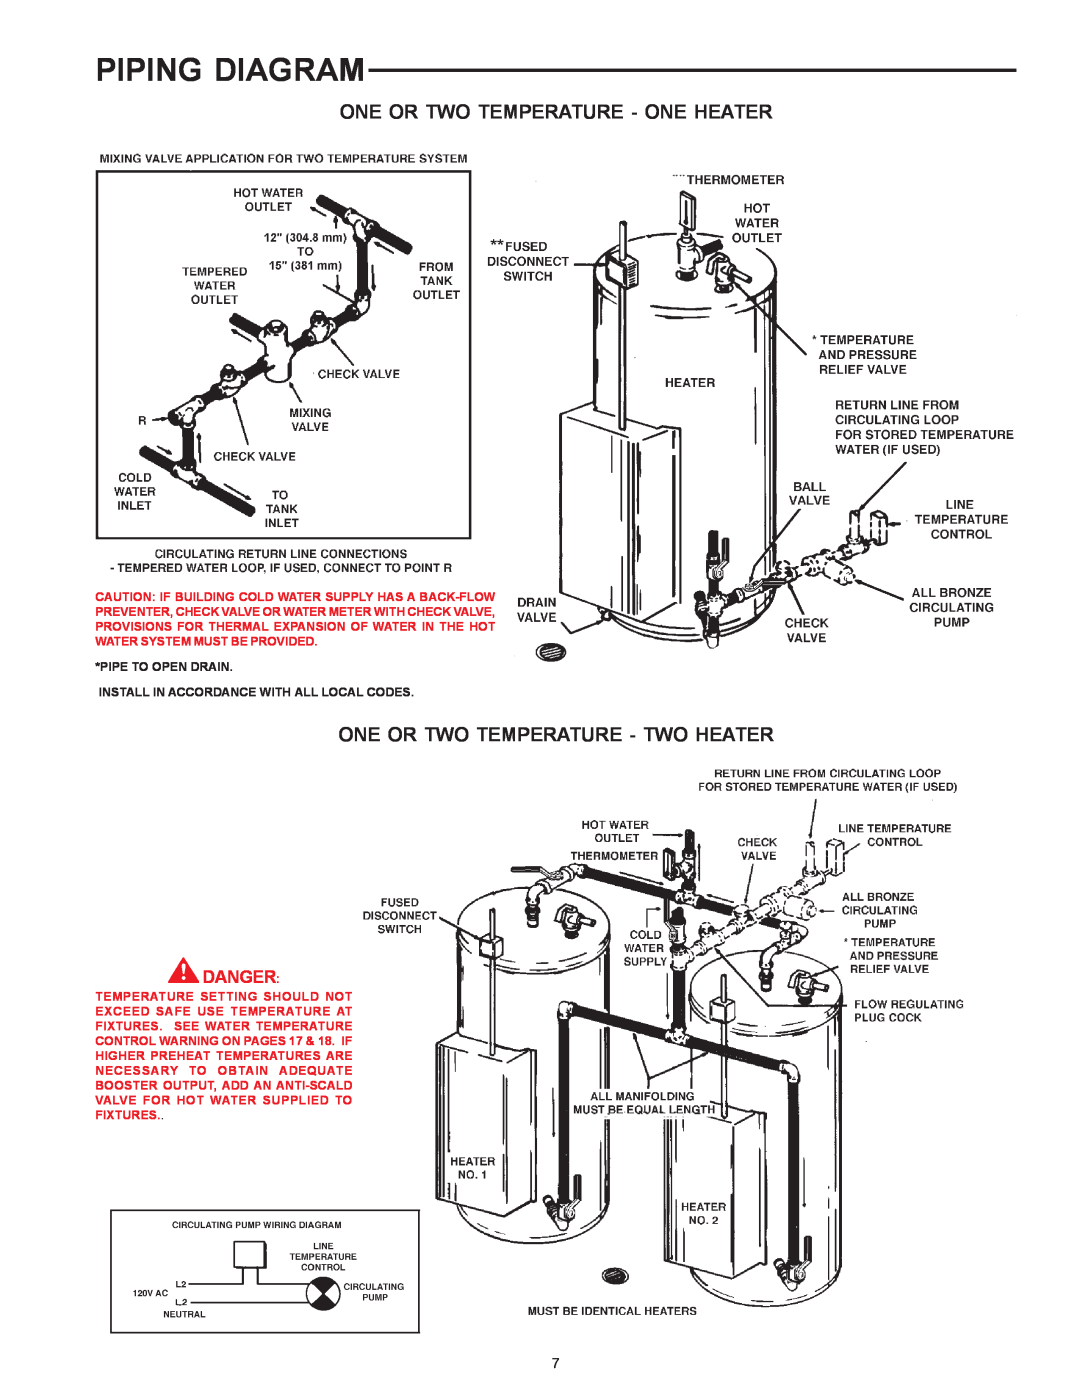 State Industries SSE-120 Piping Diagram, One Or Two Temperature - One Heater, One Or Two Temperature - Two Heater, Danger 